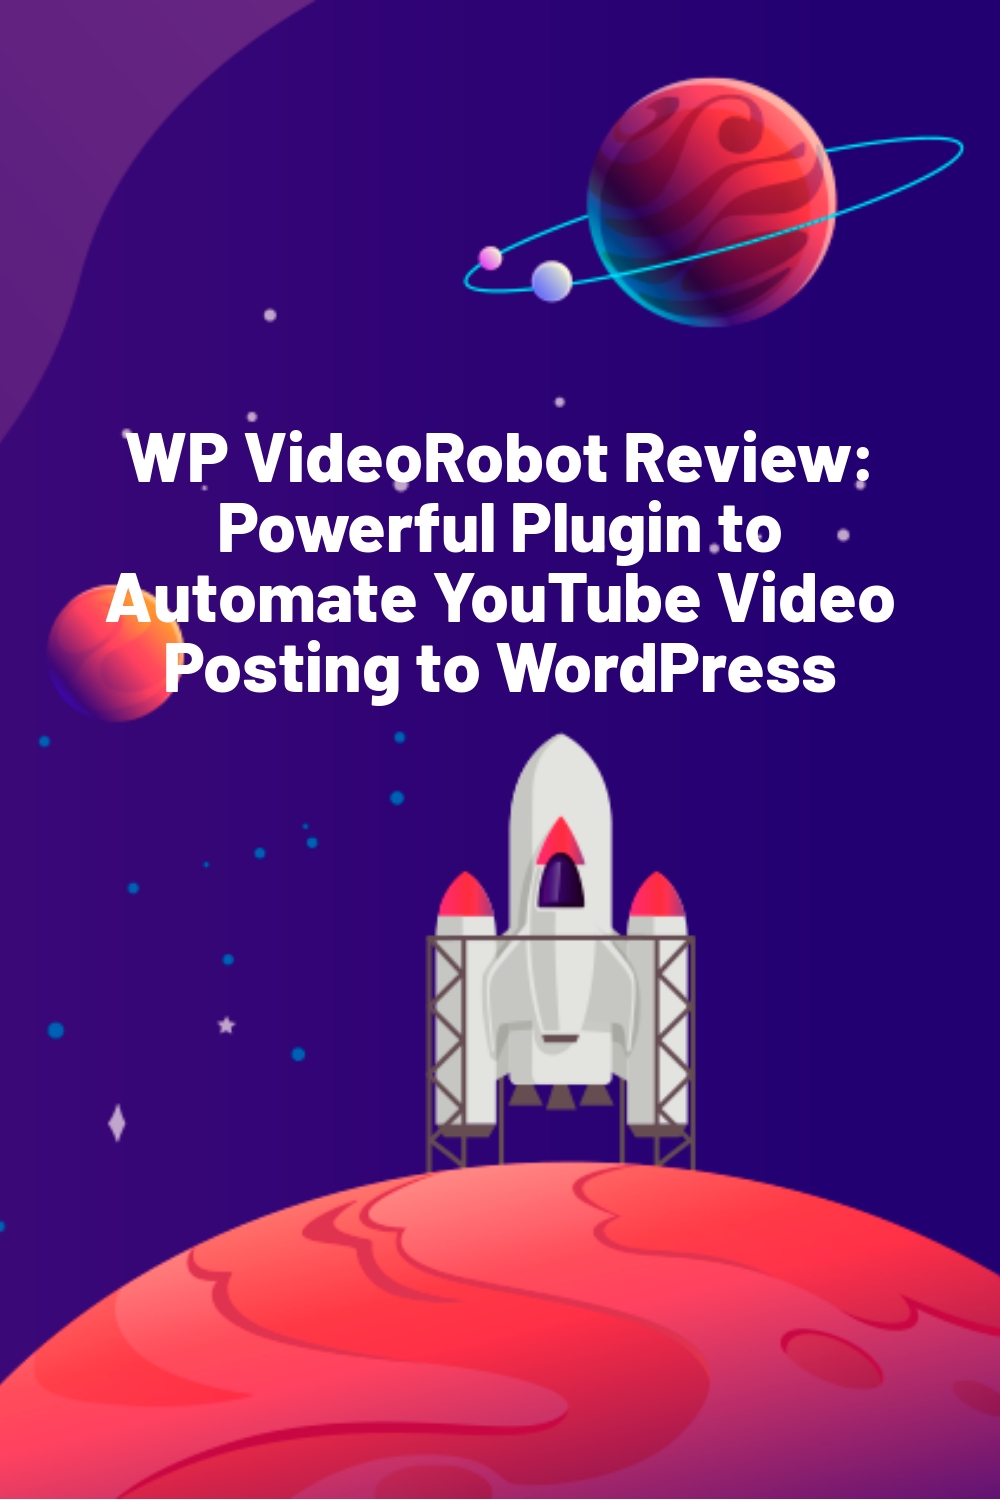 WP VideoRobot Review: Powerful Plugin to Automate YouTube Video Posting to WordPress